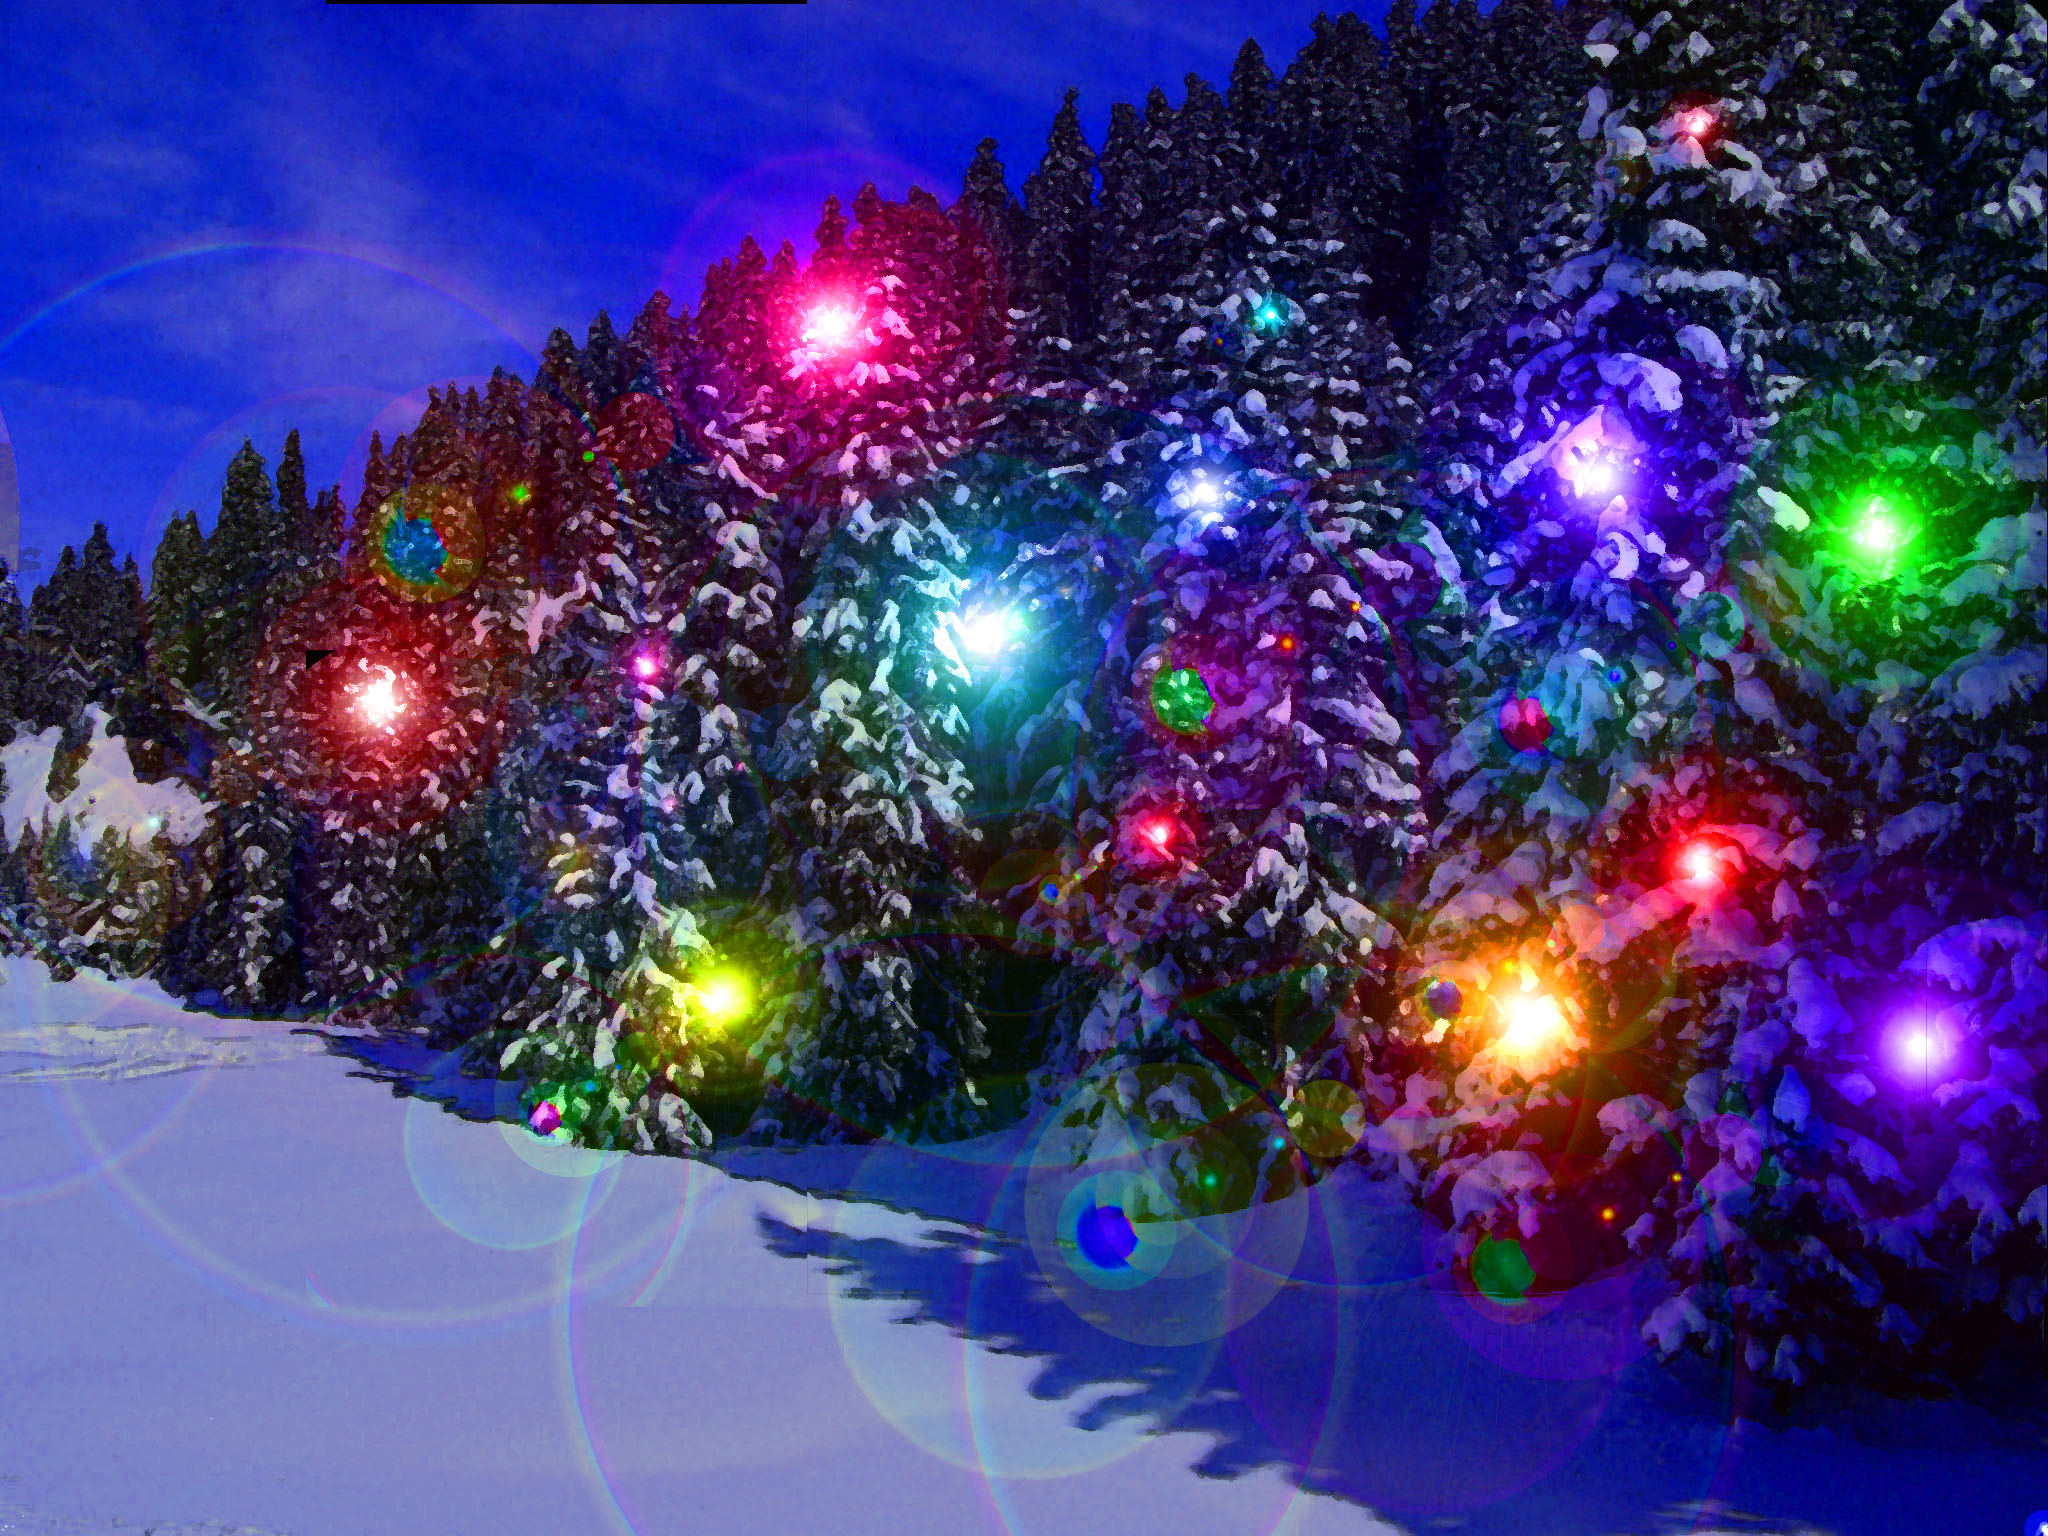 Animated Holiday Lights Wallpaper - Snowy Background With Christmas Lights - HD Wallpaper 